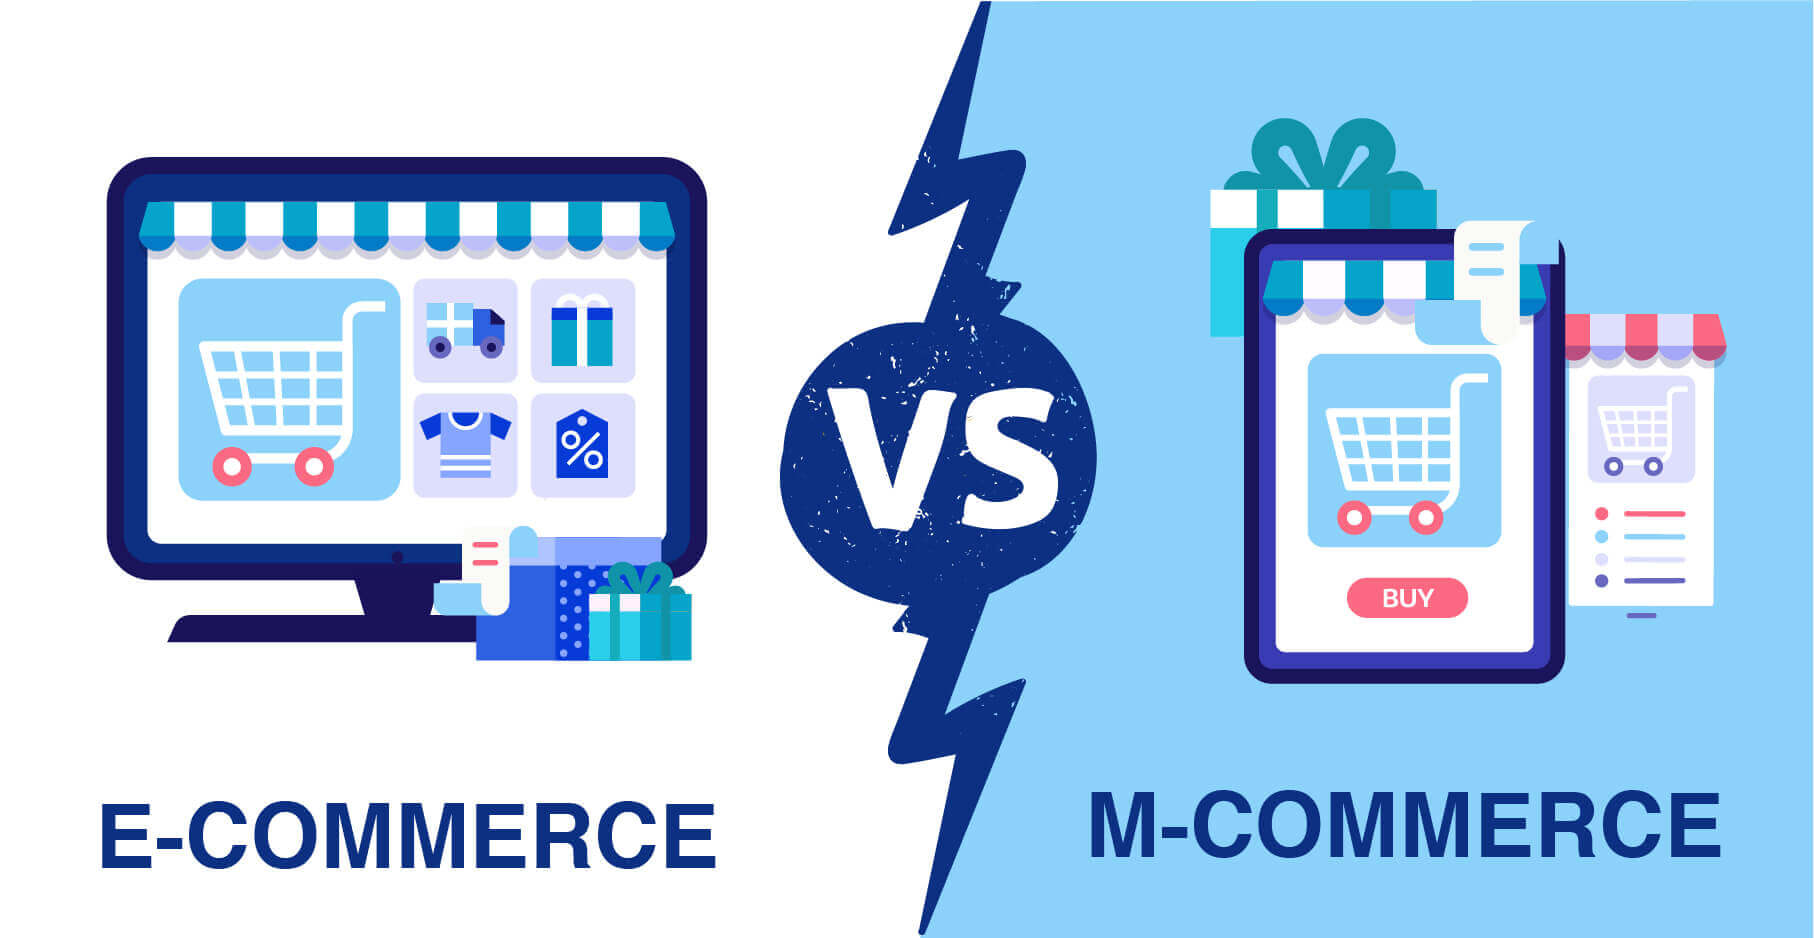 M-commerce vs eCommerce: The comparison brings to you the most comprehensive look